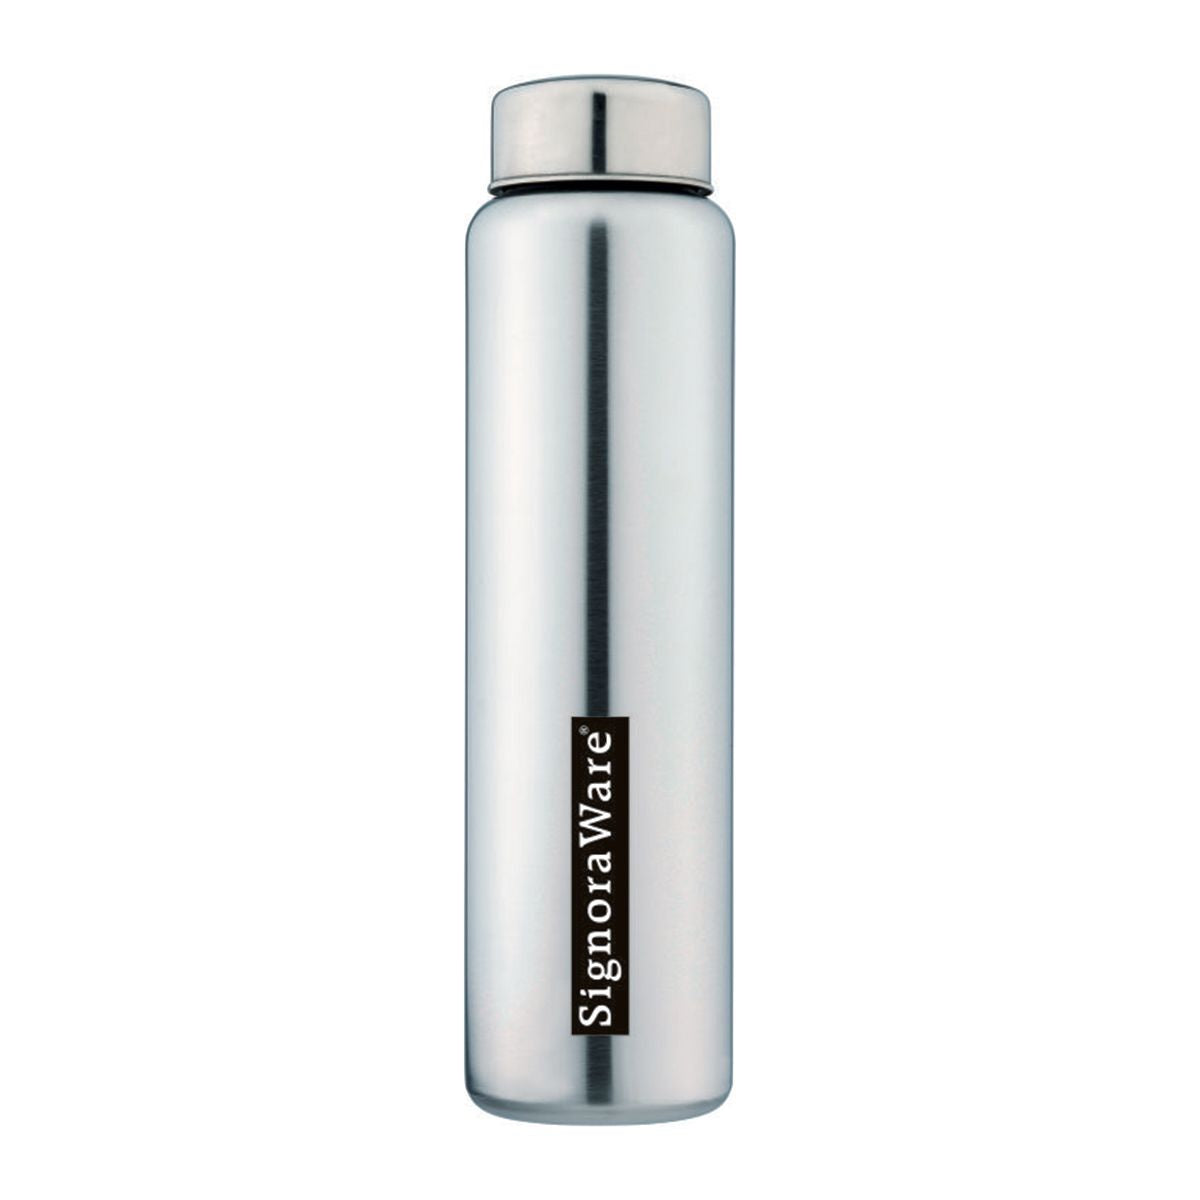 Signoraware Riva Steel Water Bottle - 750 ML - Daily Needs Products